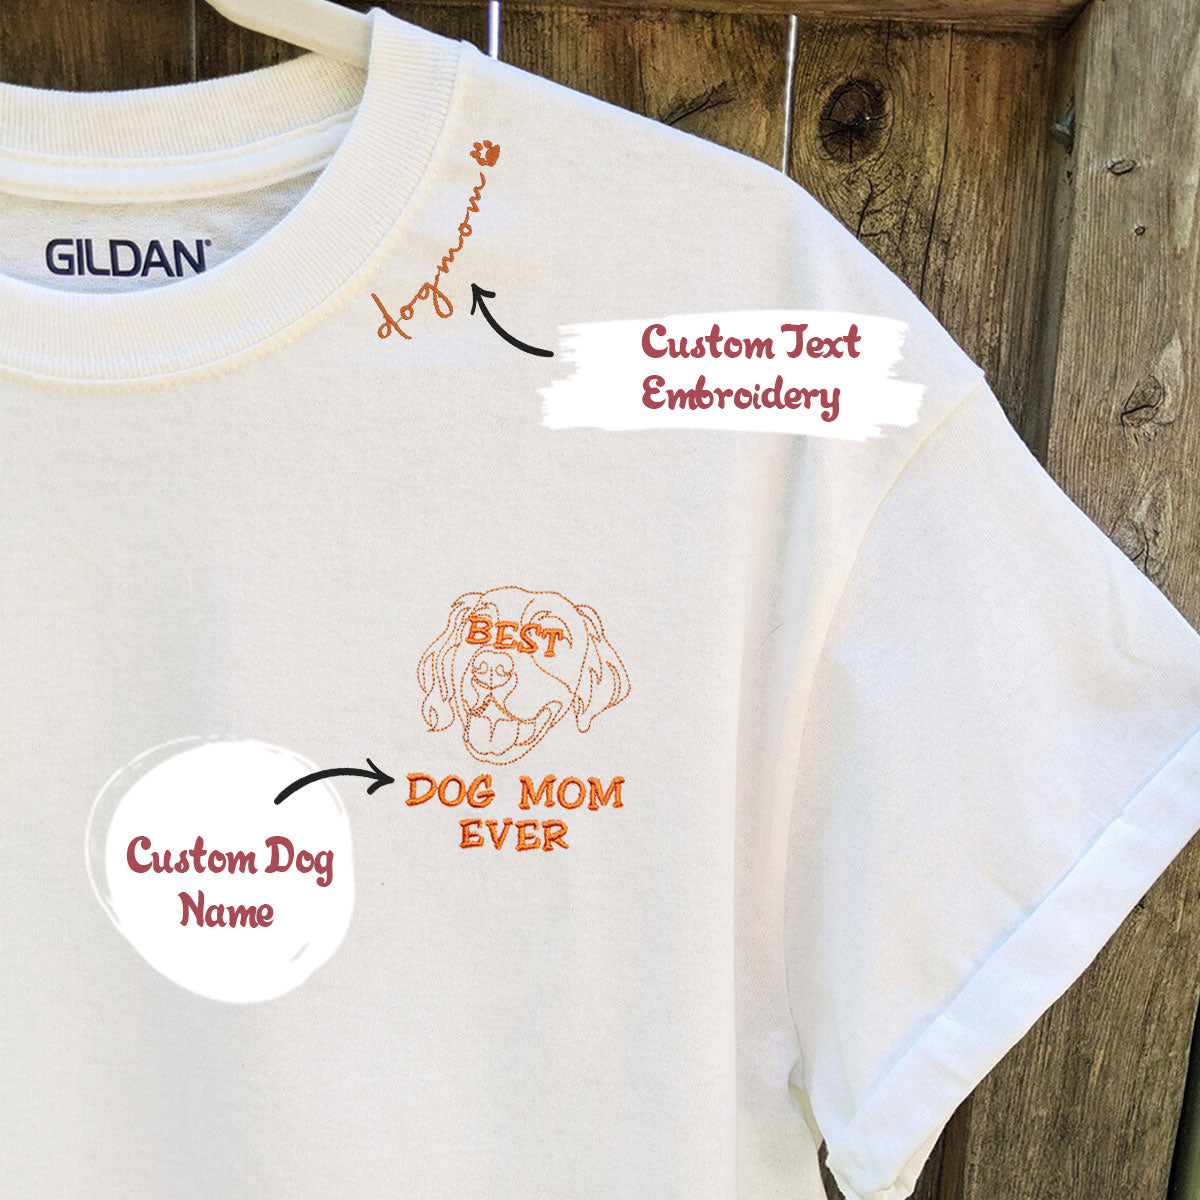 Personalized Best Golden Retriever Dog Mom Ever Embroidered Colar Shirt, Custom Shirt with Dog Name, Best Gifts for Golden Retriever Lovers